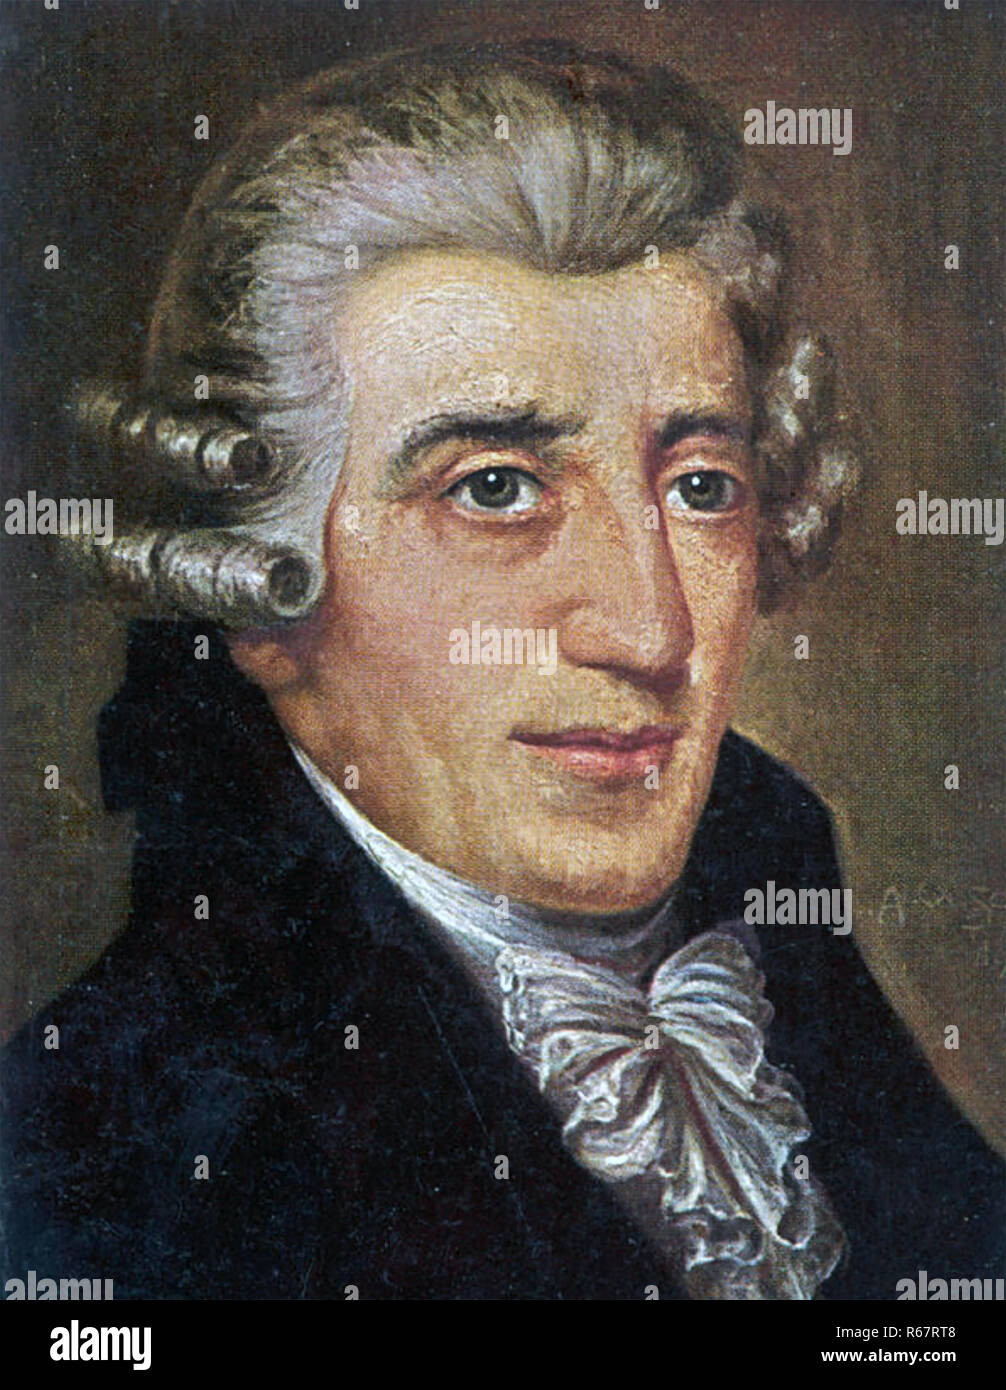 JOSEPH HAYDN (1732-1809) Austrian composer in an early 20th century illustration based on a 1791 portrait. Stock Photo